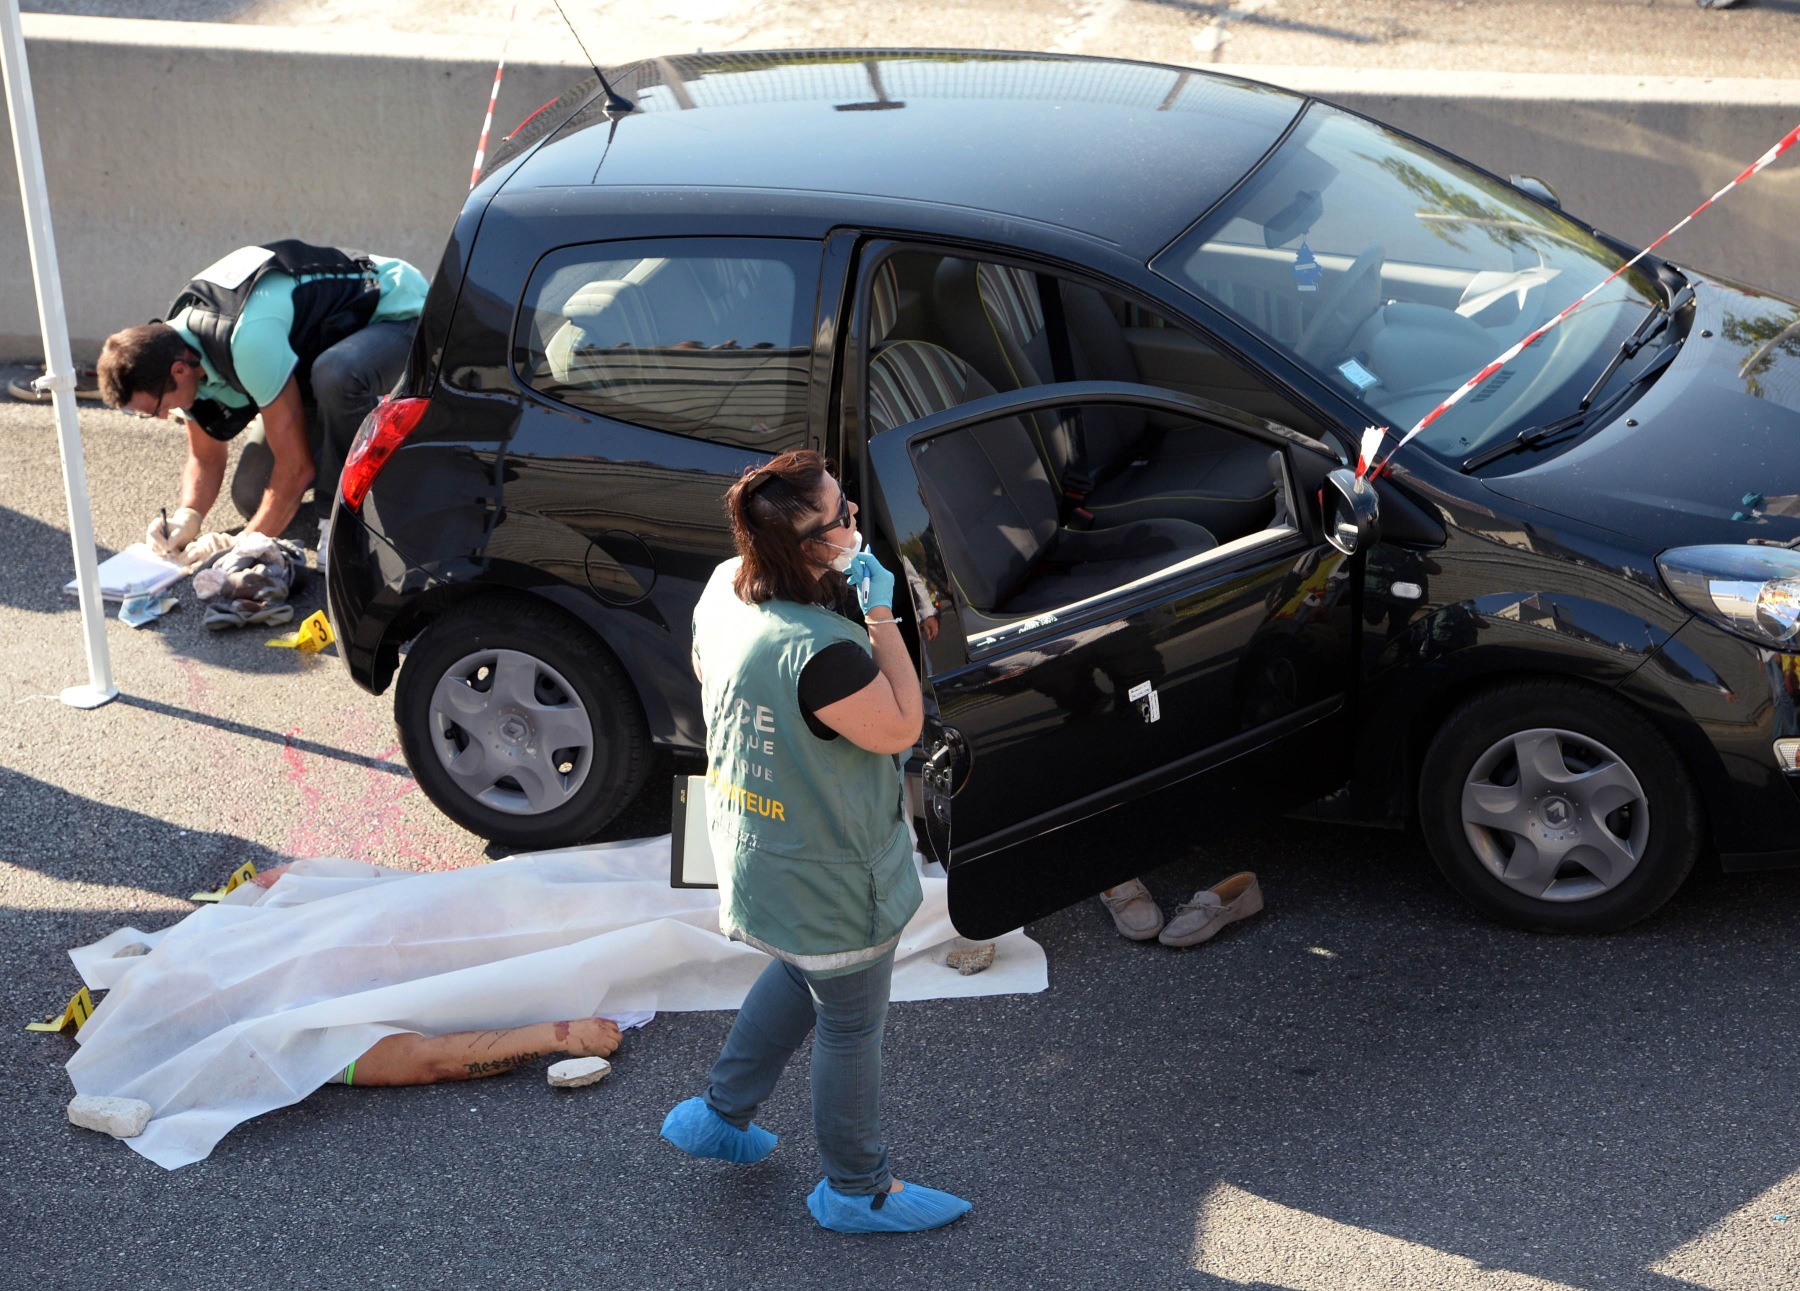 Forensic experts inspect the crime scene where Adrien Anigo, son of the Olympique de Marseille football team manager Jose Anigo, was shot dead by two men on a motorbike as he drove his car in Marseille, southern France. Photo: AFP